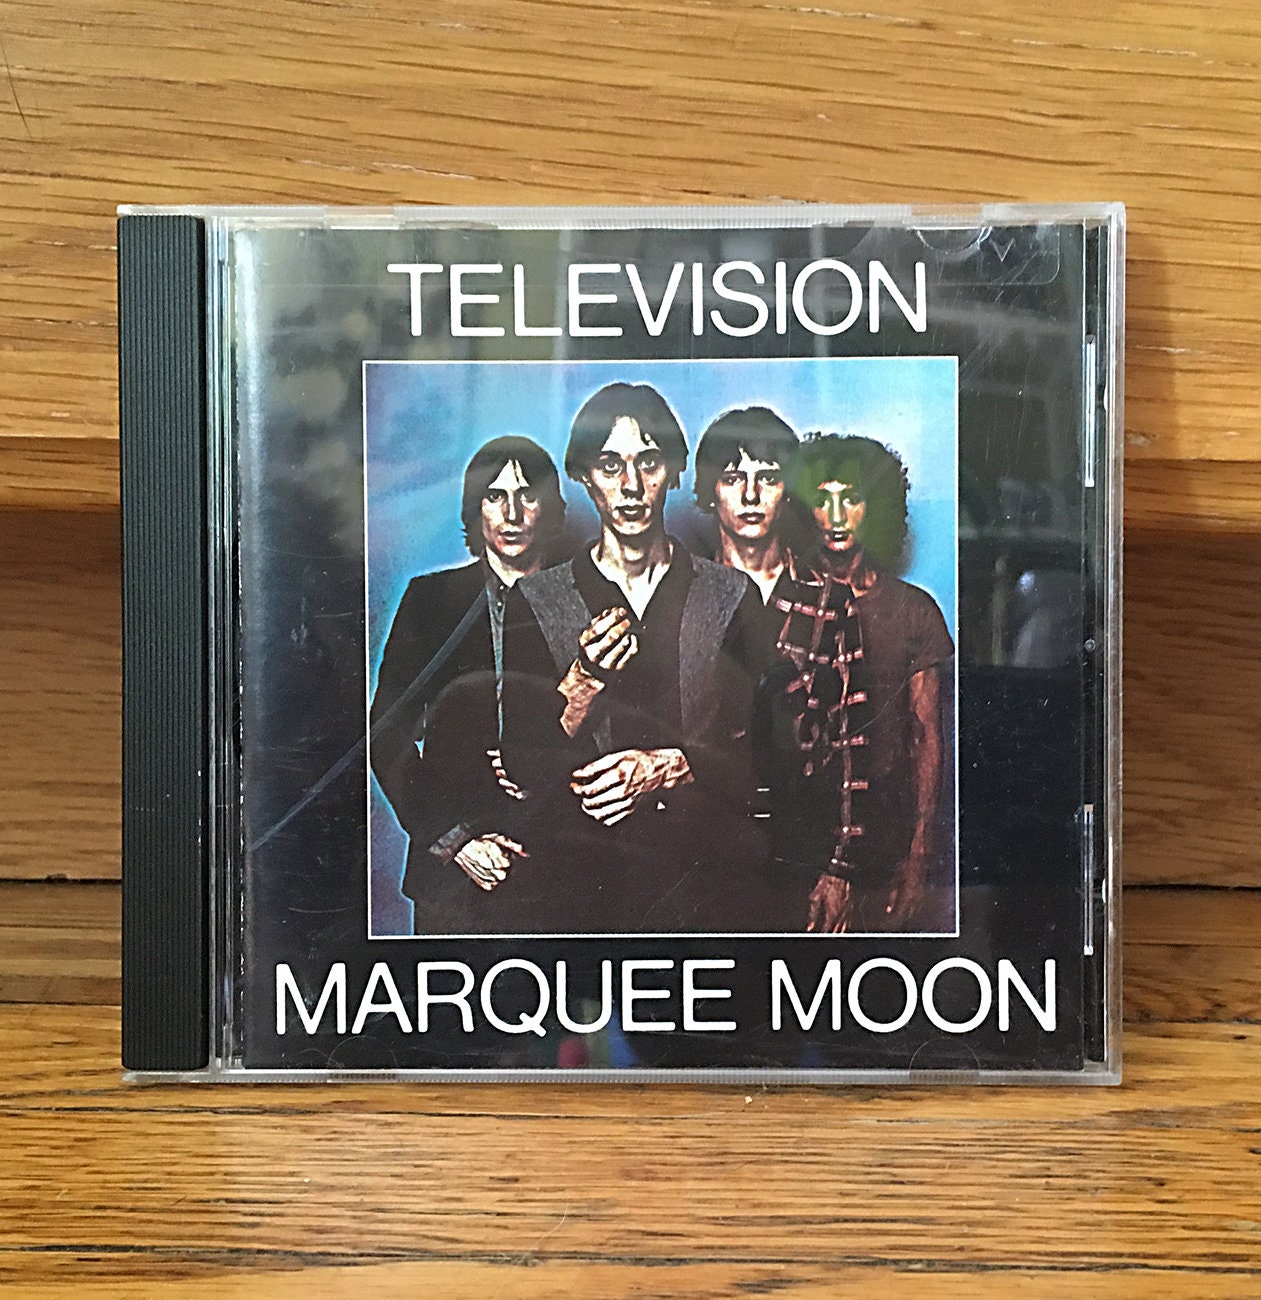 Television - Marquee Moon LP - Sealed Colored Vinyl Album - NEW PUNK RECORD